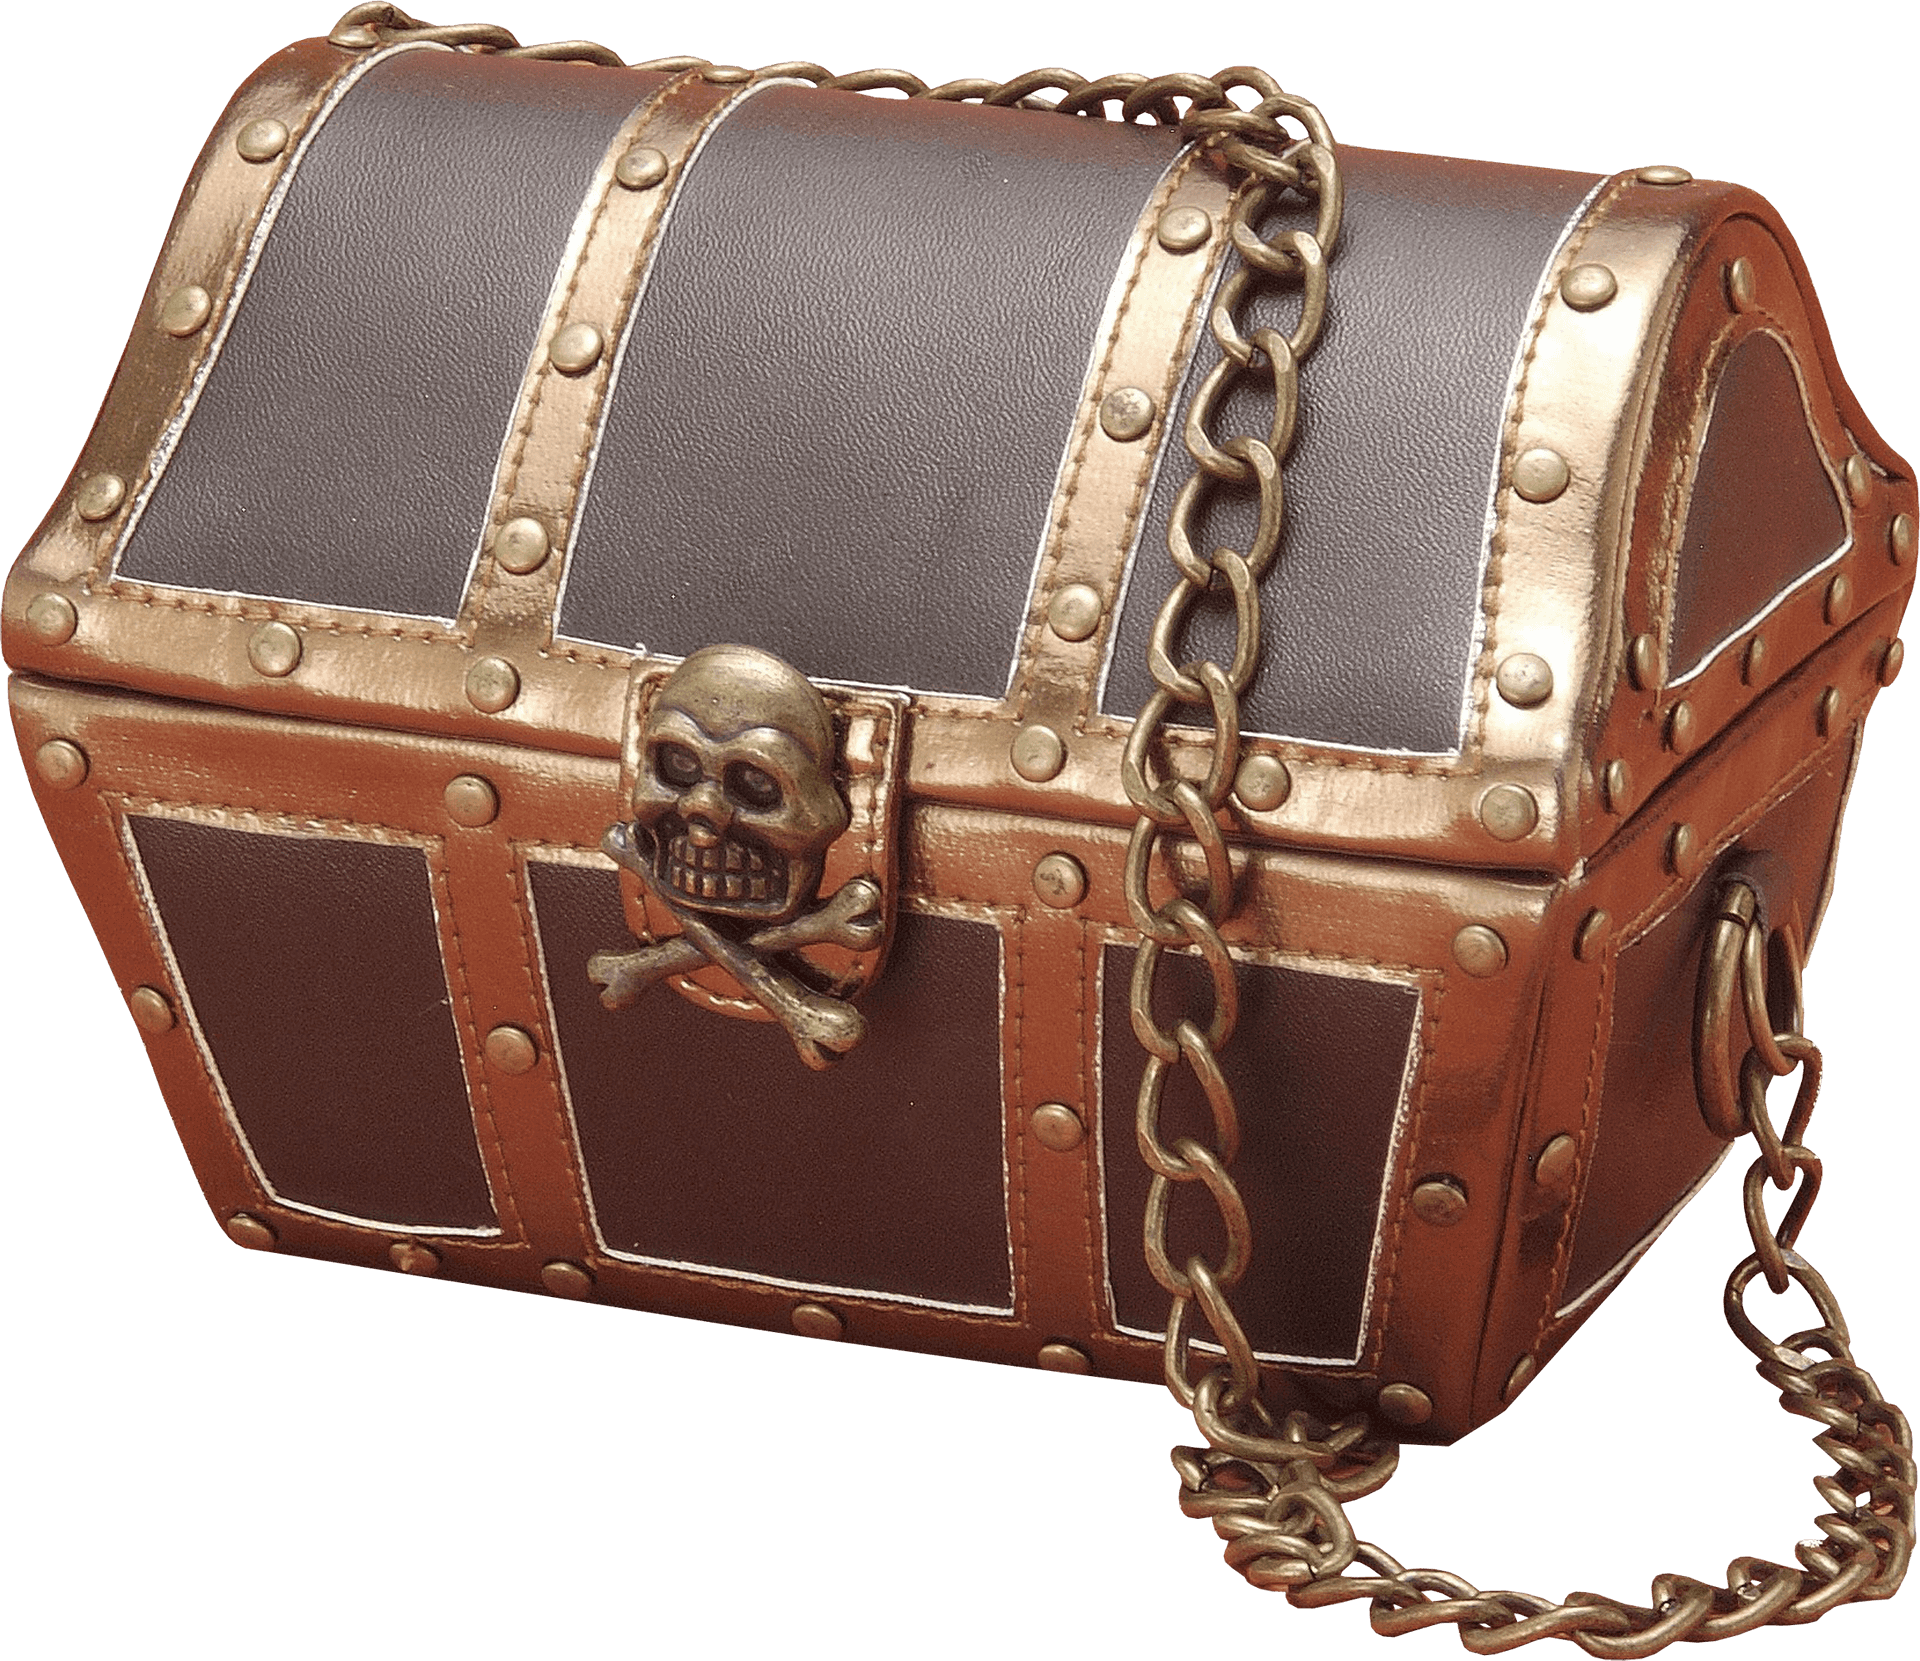 Vintage Pirate Treasure Chest PNG